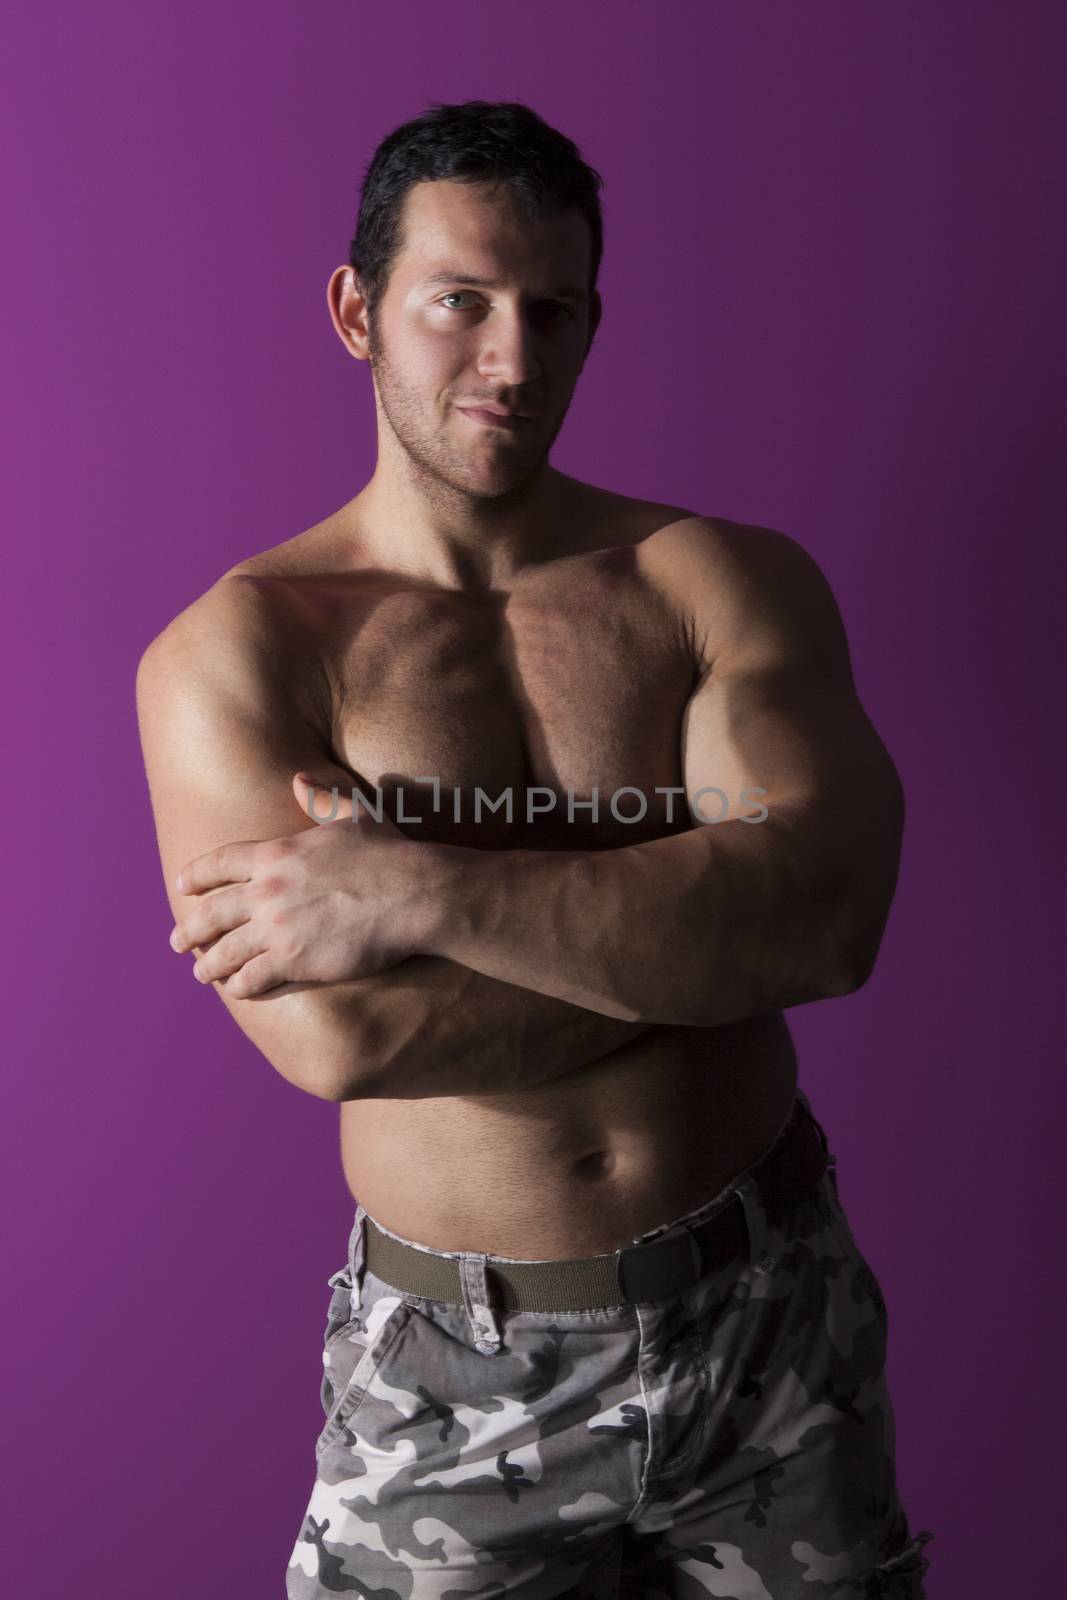 Sexy muscular shirtless bodybuilder smiling and looking into the camera isolated. Fitness is sexy.